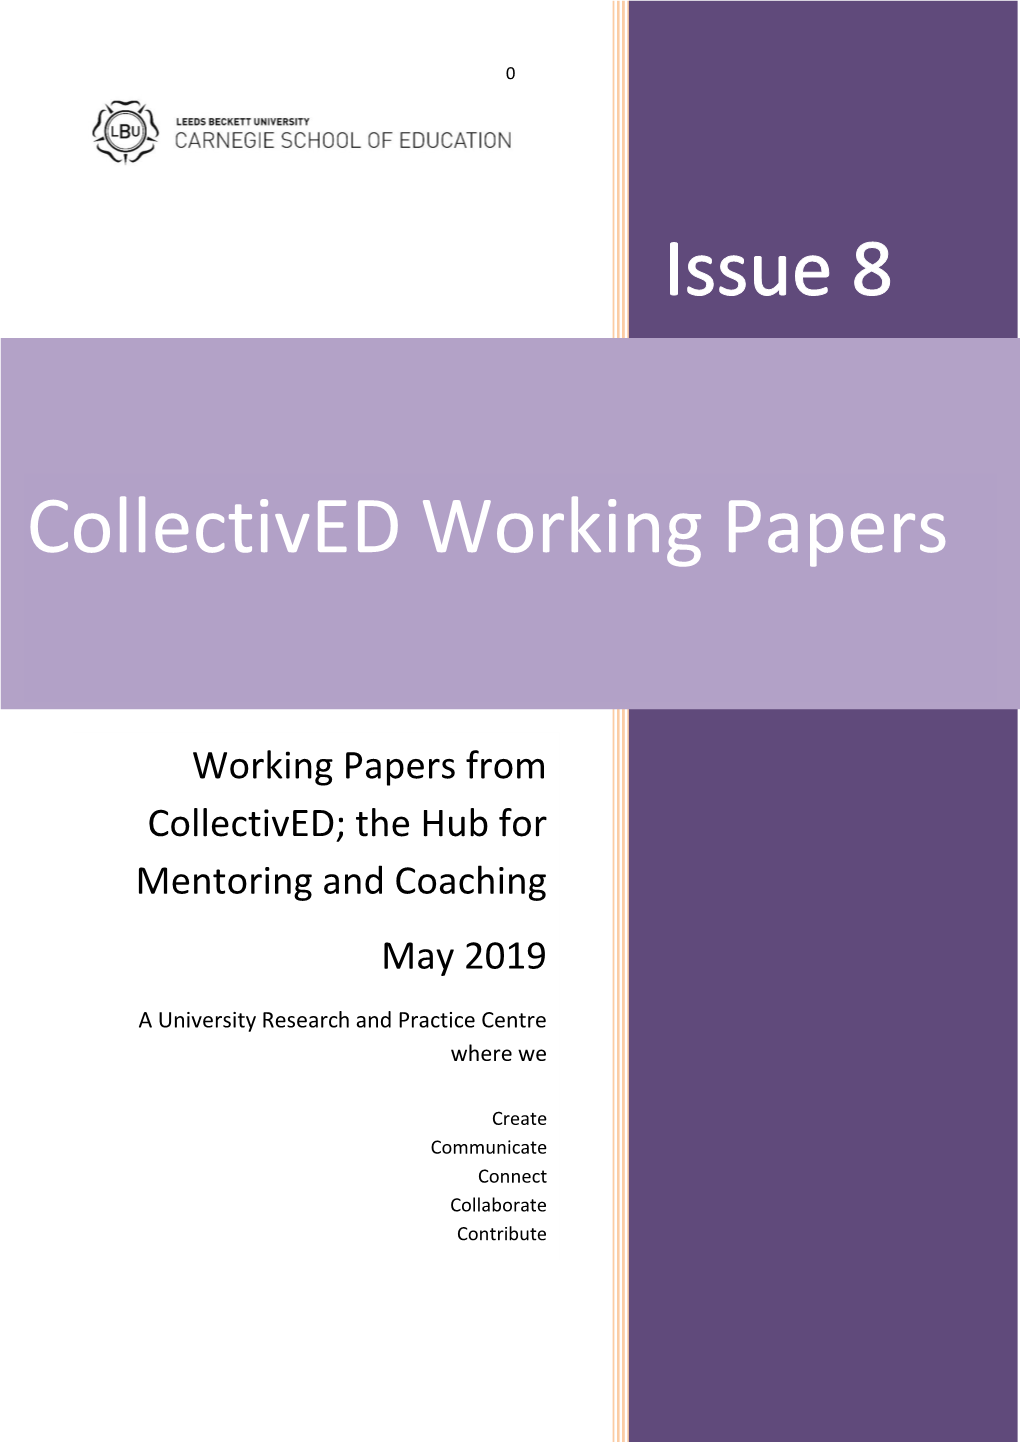 Collectived Working Papers